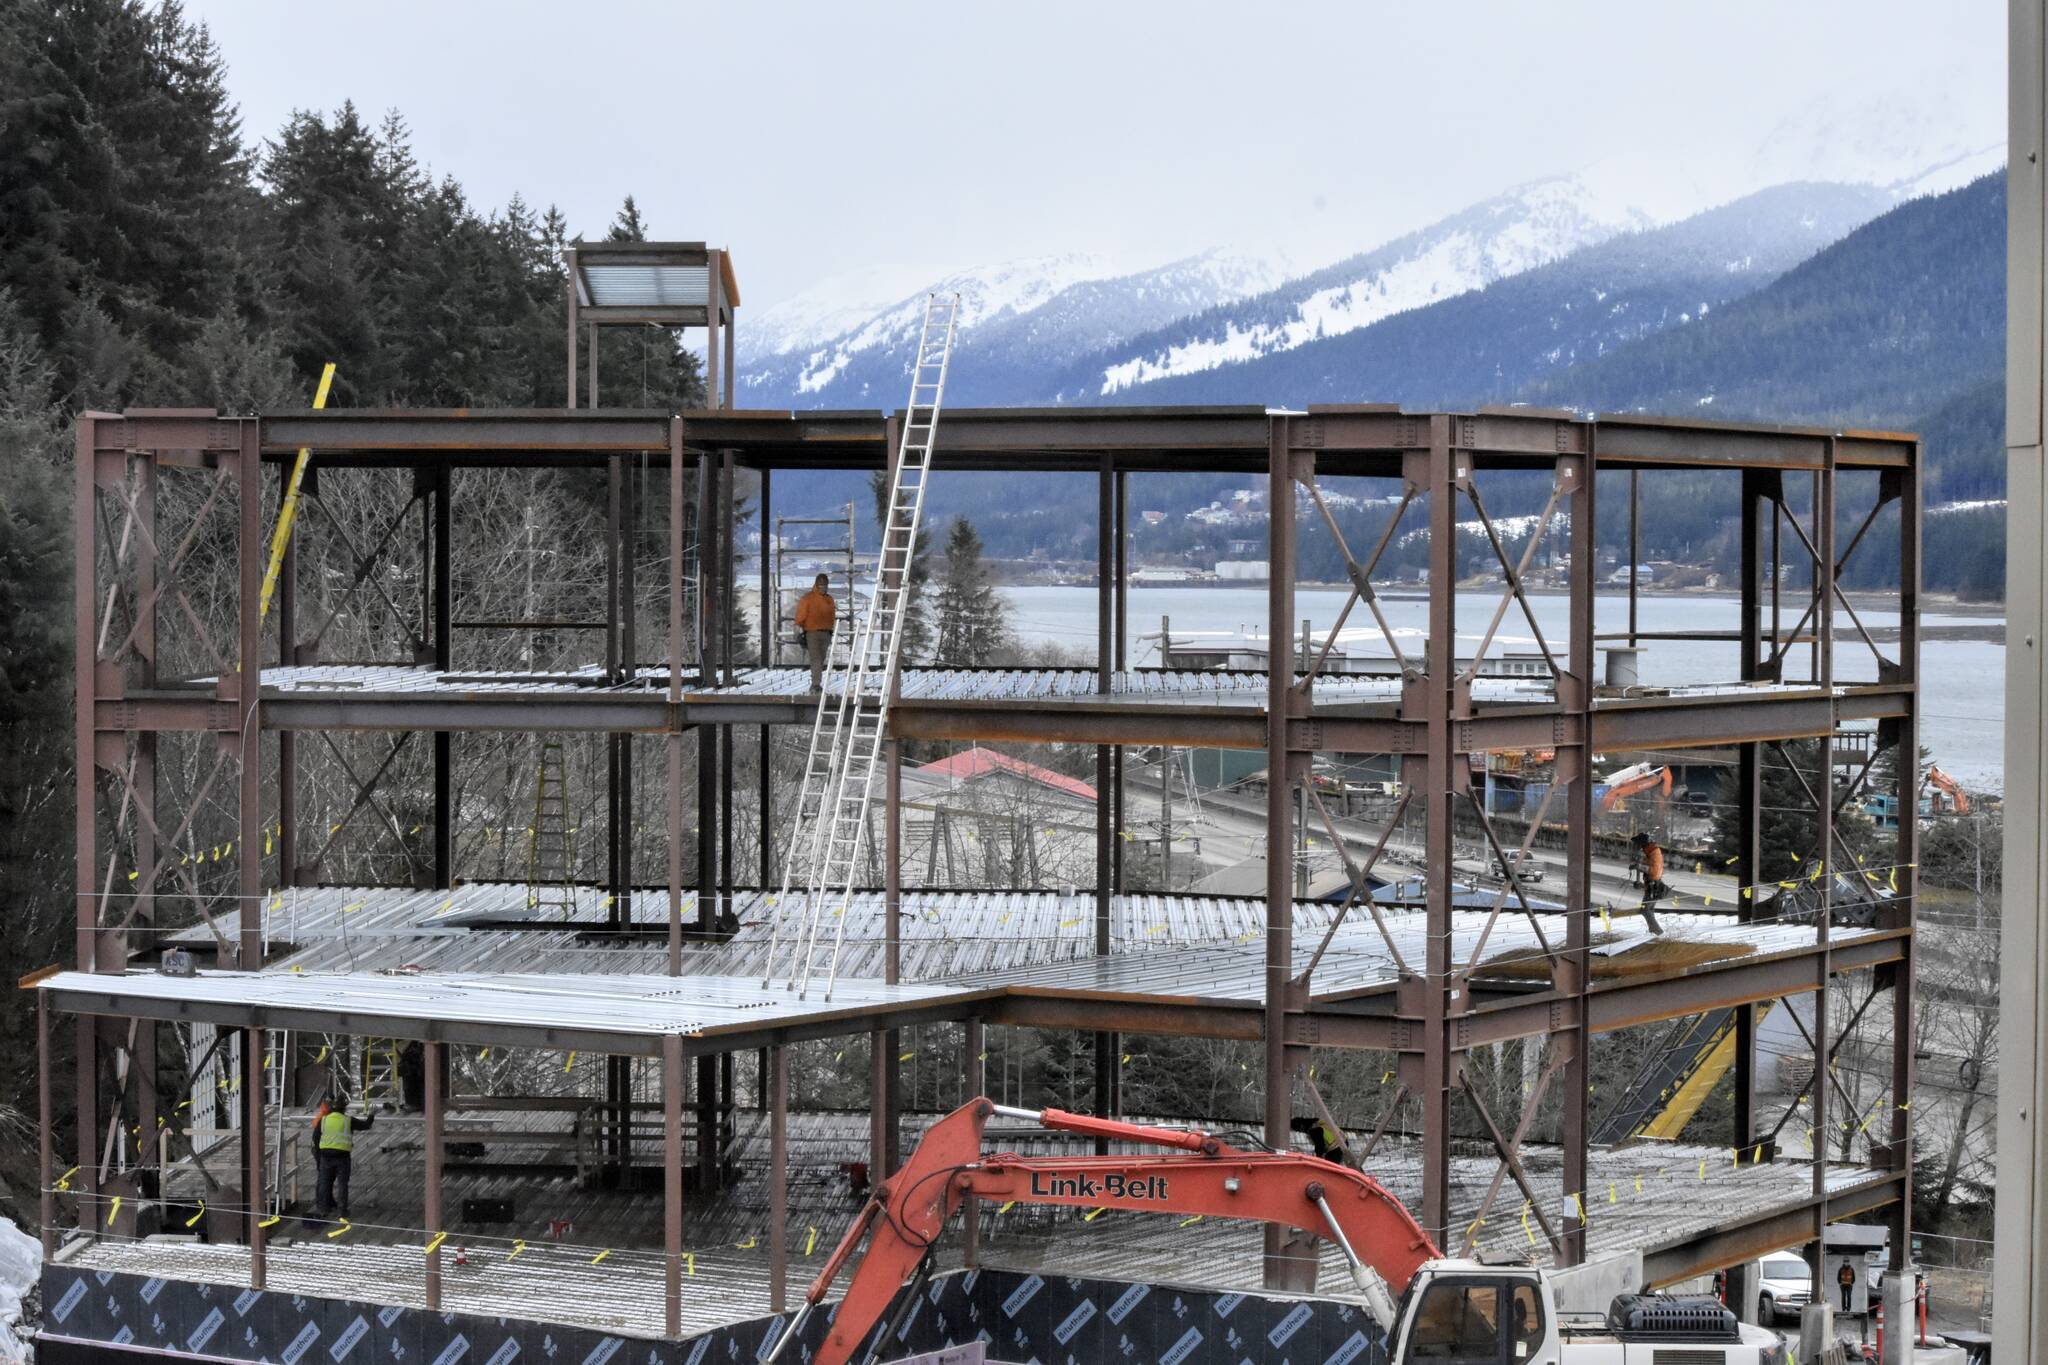 Bartlett Regional Hospital’s new crisis stabilization center was under construction on March 24, 2022, and is slated to open next year. Hospital staff said the center will help the hospital address the high number of behavioral health needs in the Juneau community. (Peter Segall / Juneau Empire)